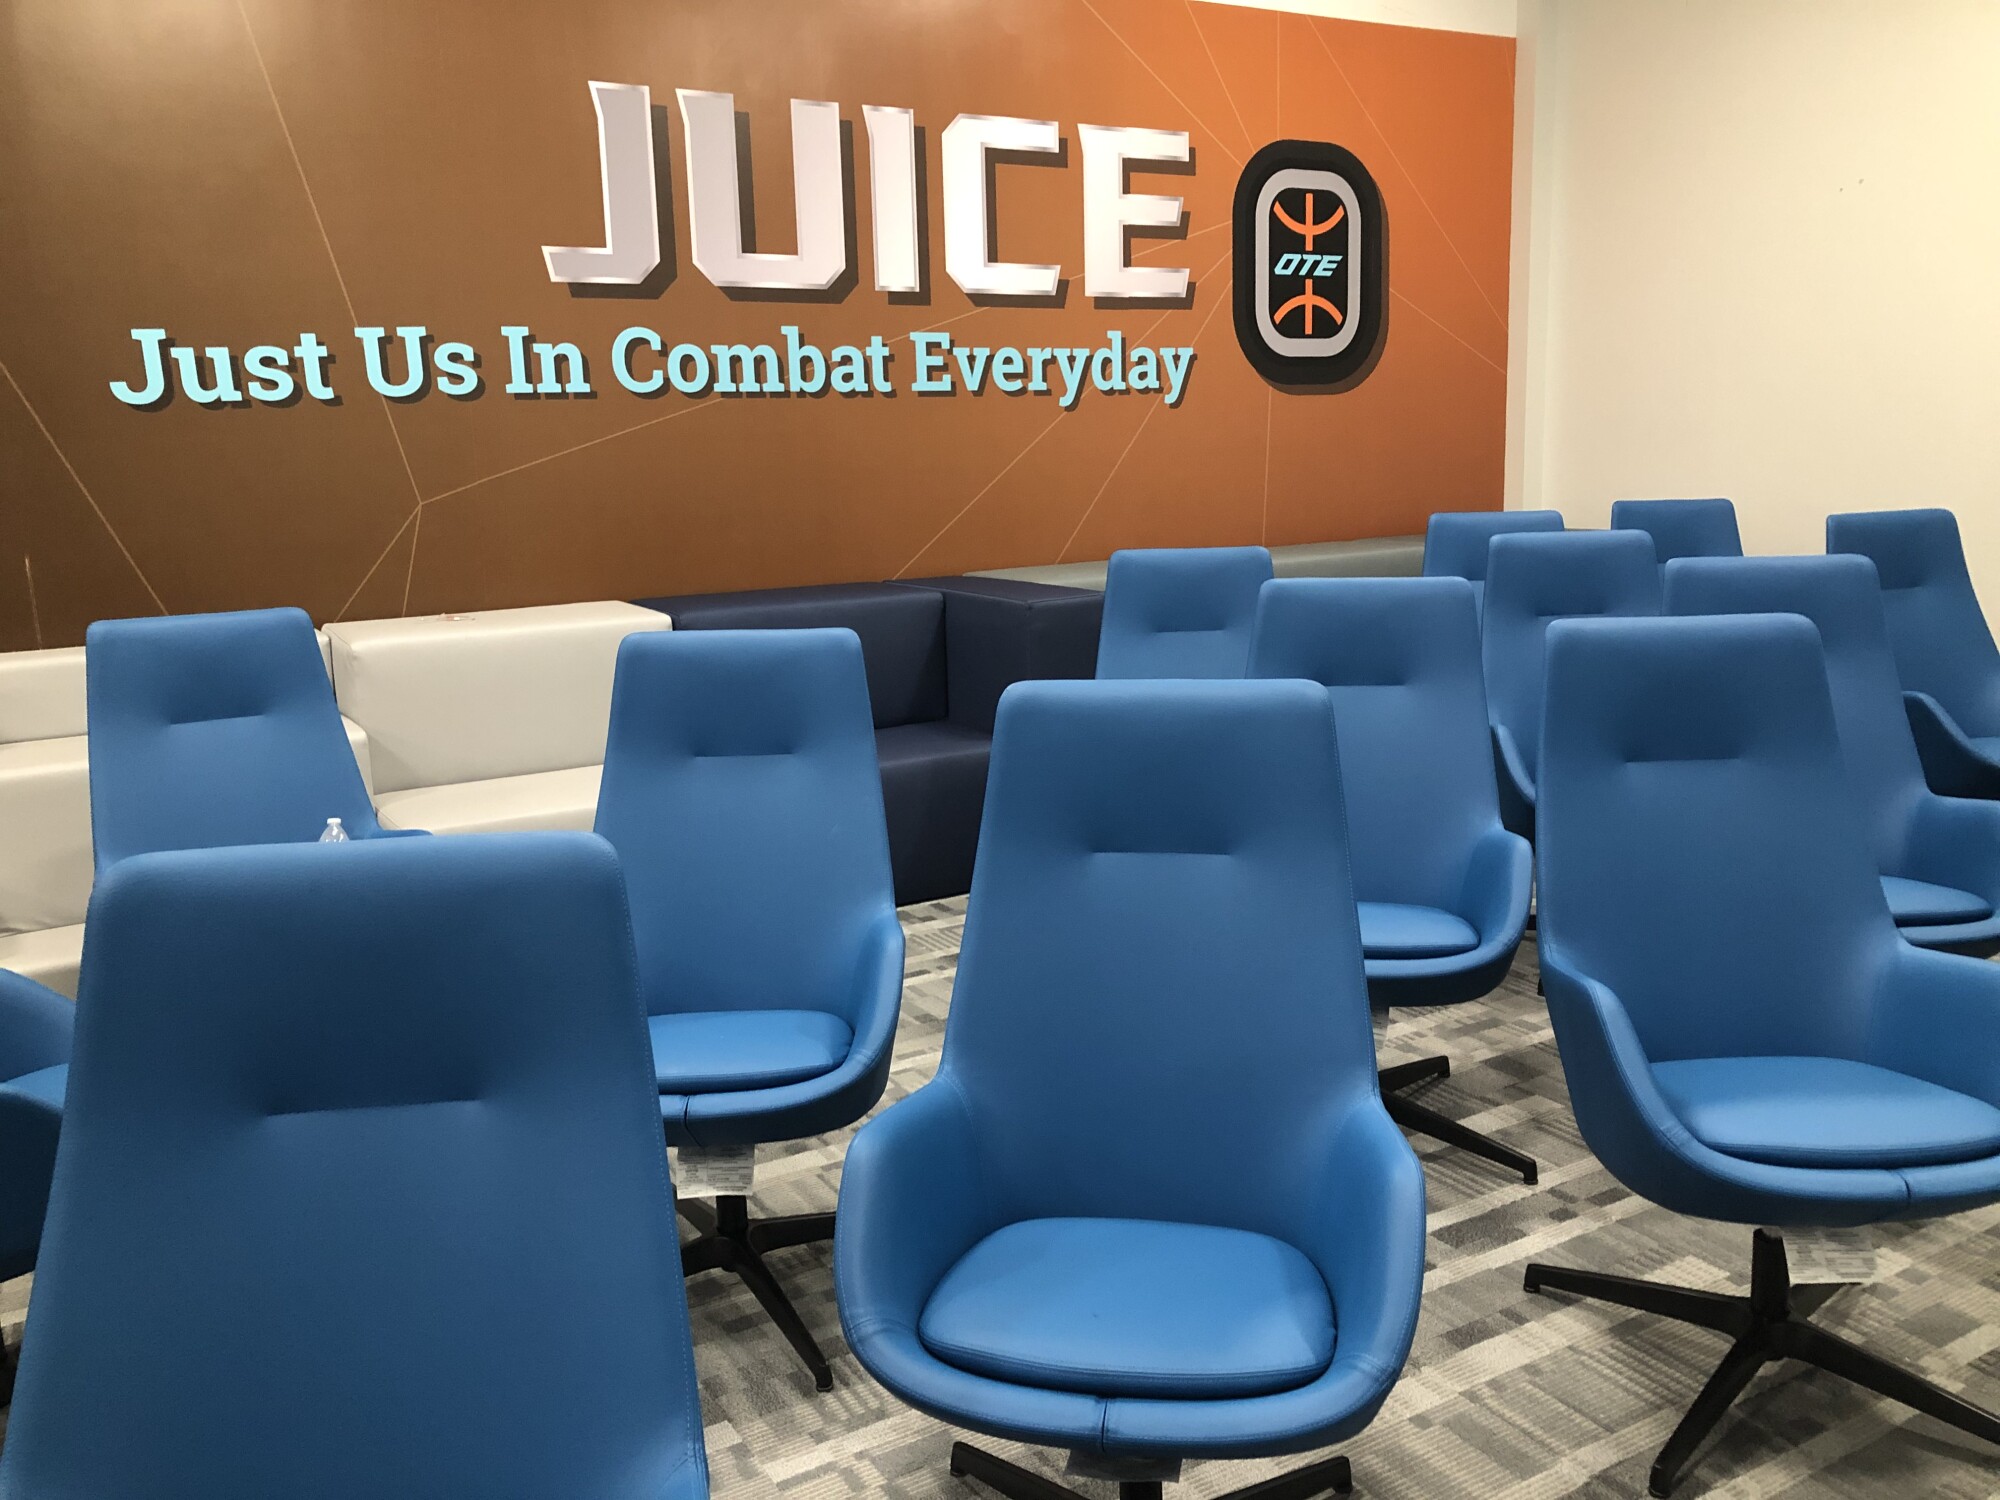 A look inside a meeting room at the Overtime Elite campus in Atlanta.